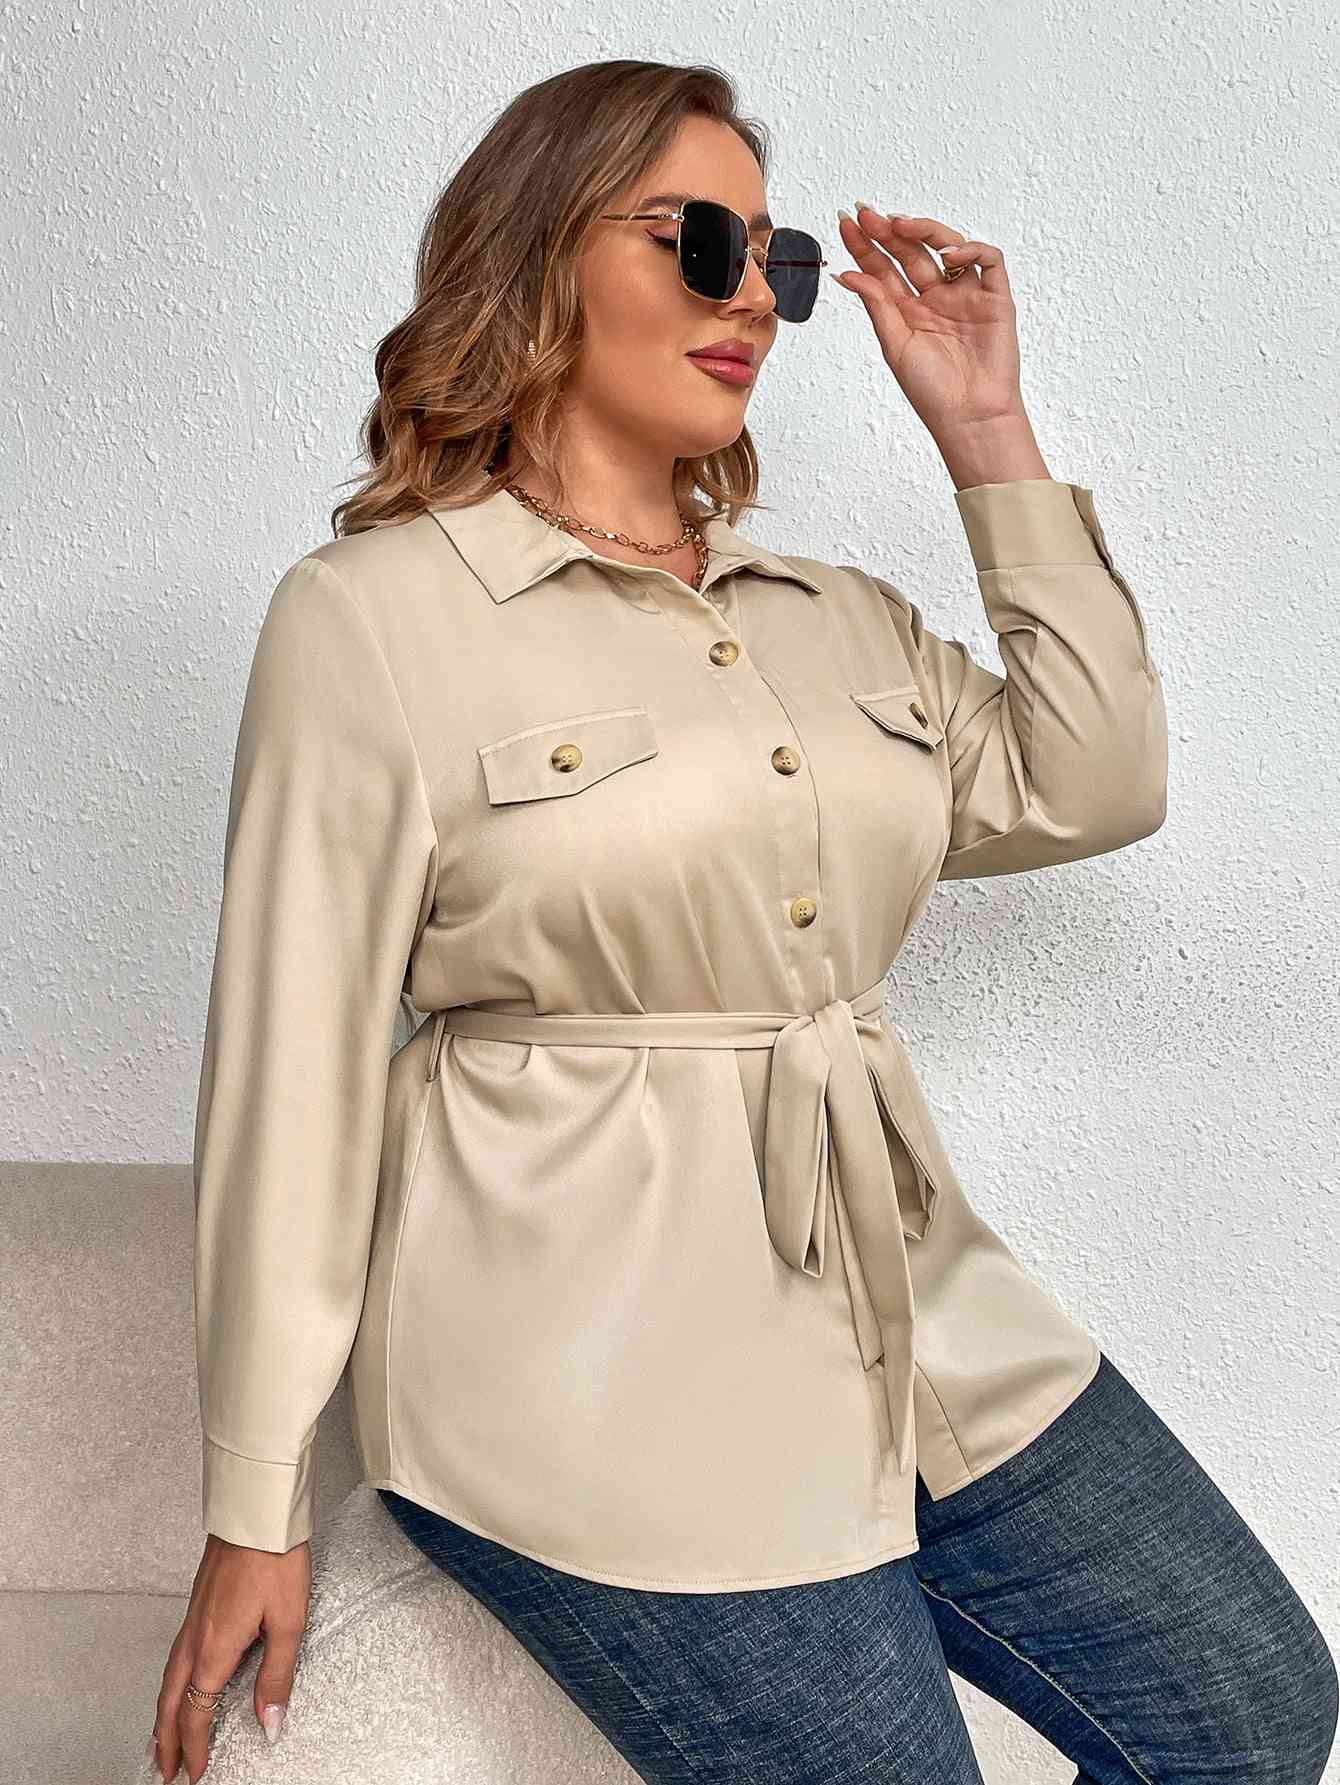 Melo Apparel Plus Size Tie Belt Long Sleeve Shirt - Just Enuff Sexy